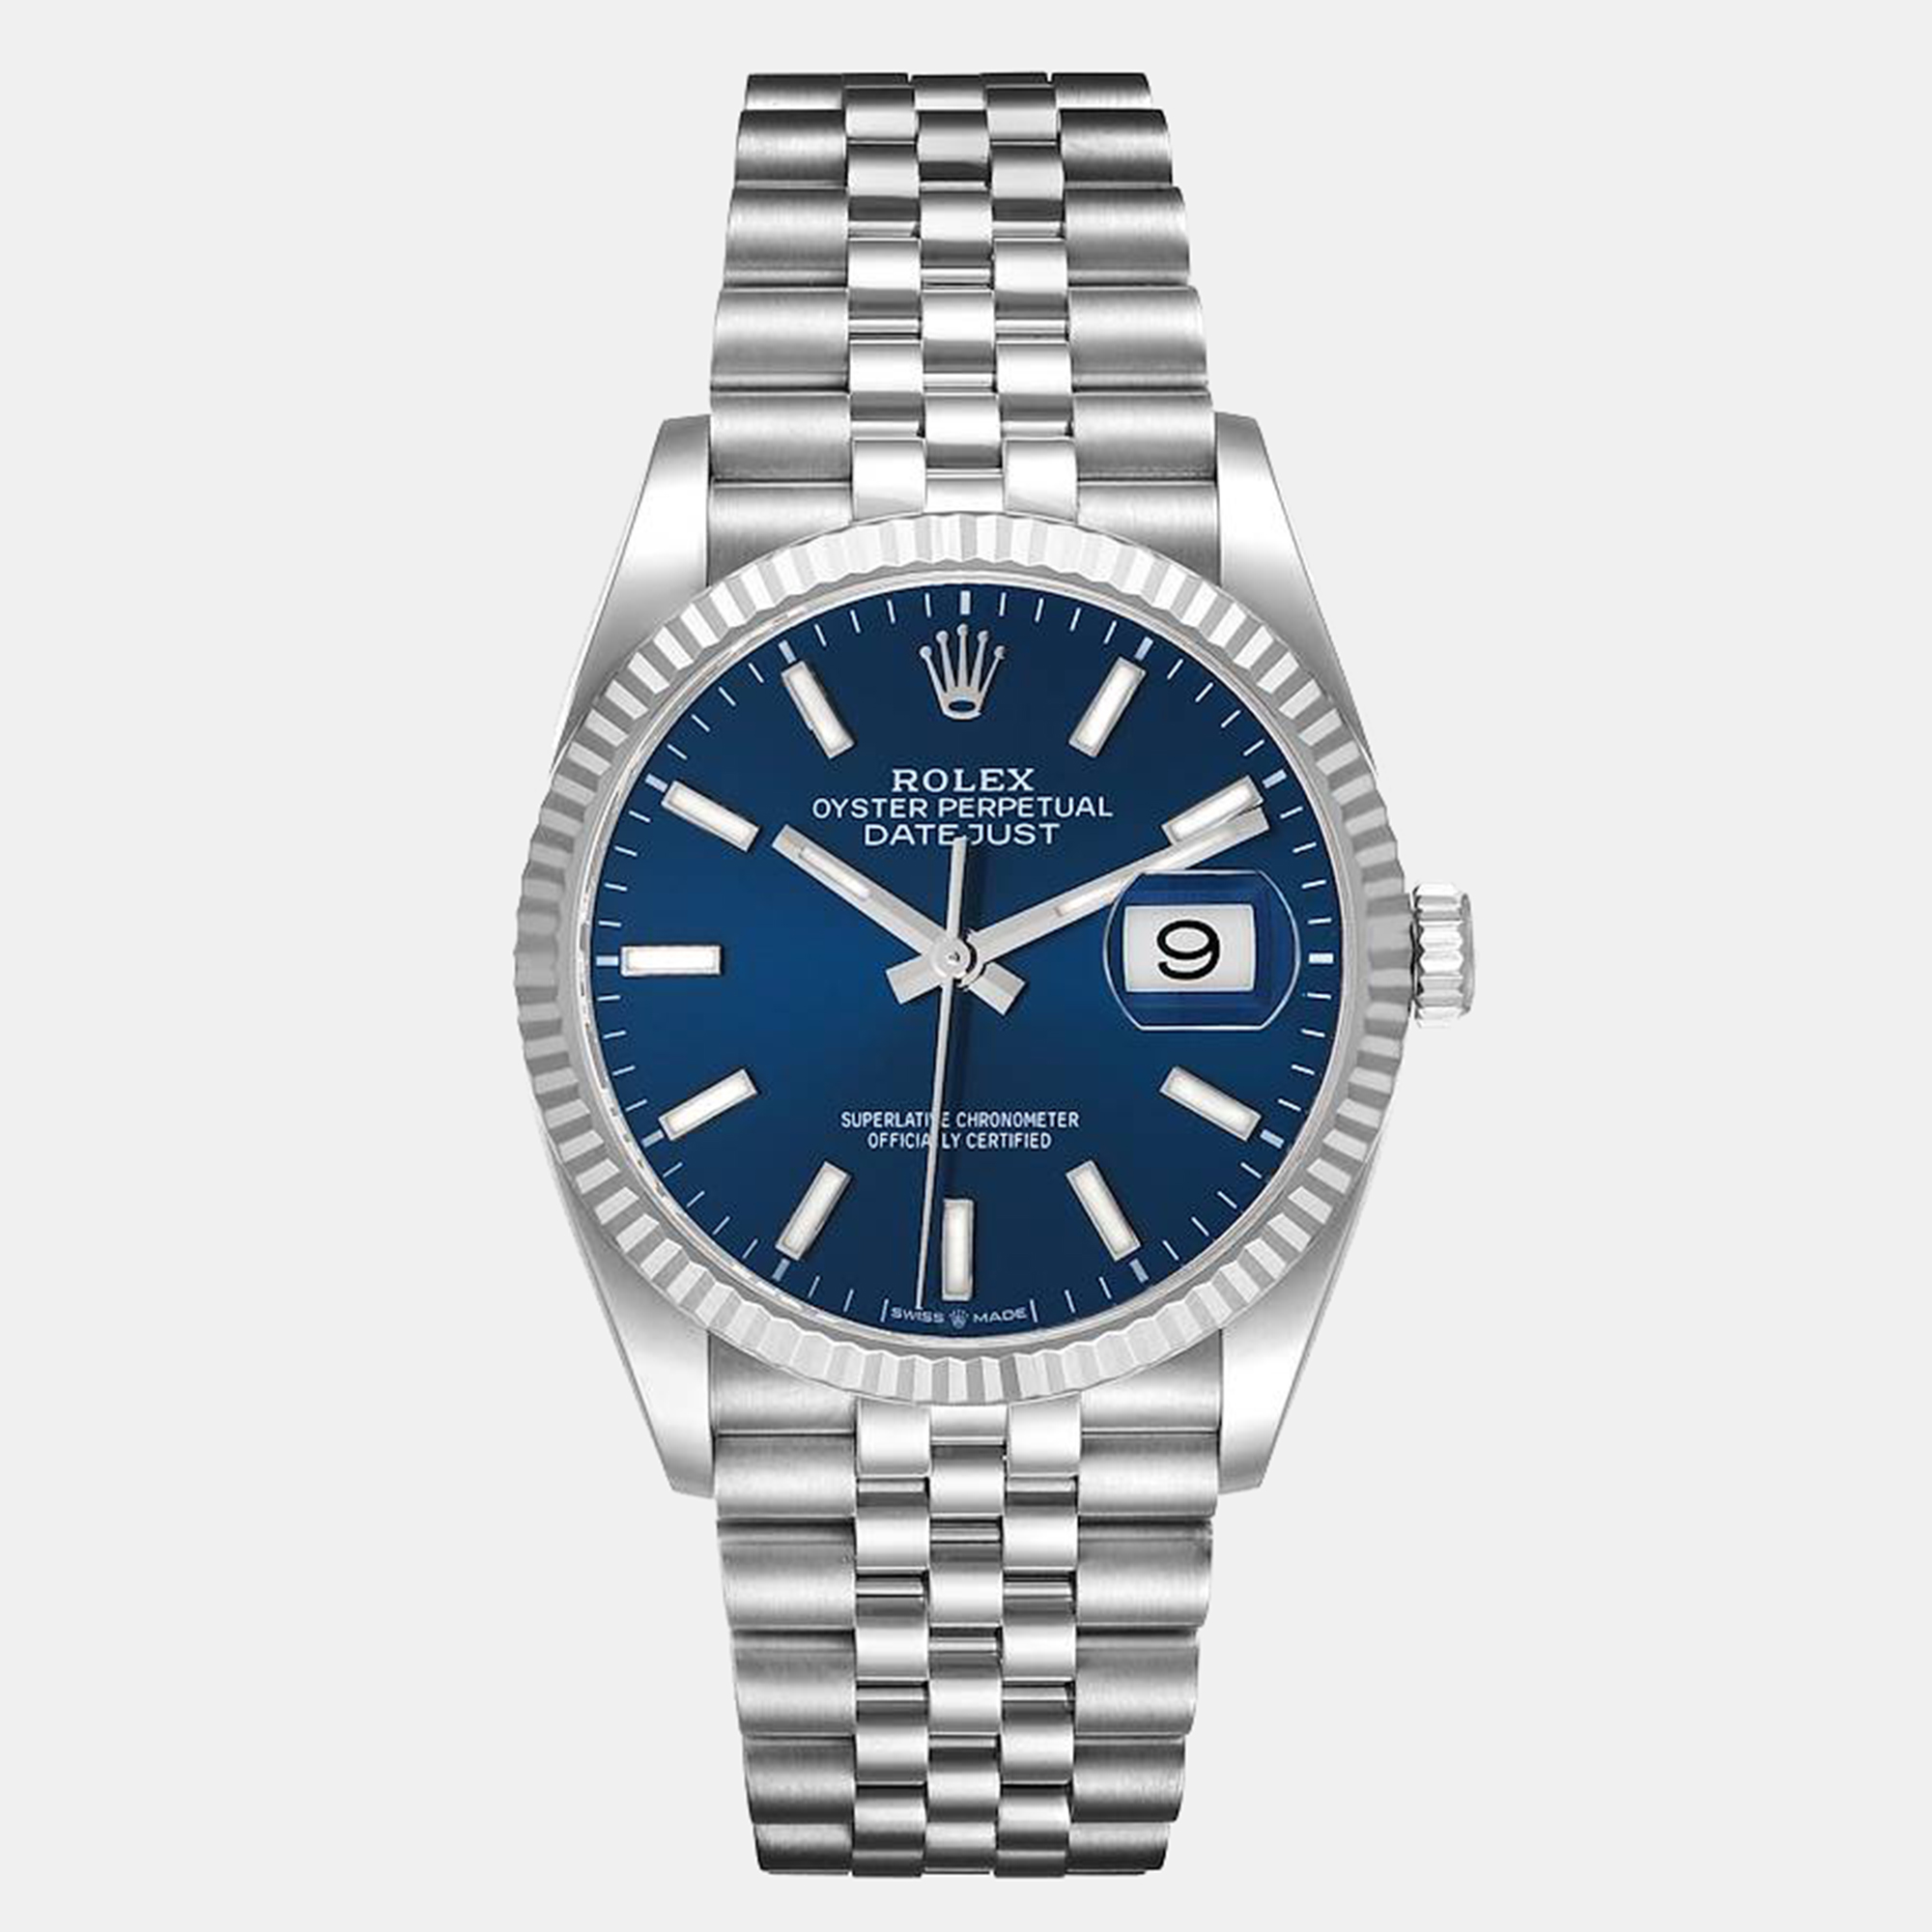 The Datejust is one of the most recognized and coveted watches from the house of Rolex. It has a distinct look and an irrefutable appeal. Crafted in stainless steel and 18k white gold this authentic Rolex Datejust wristwatch has the signature allure.